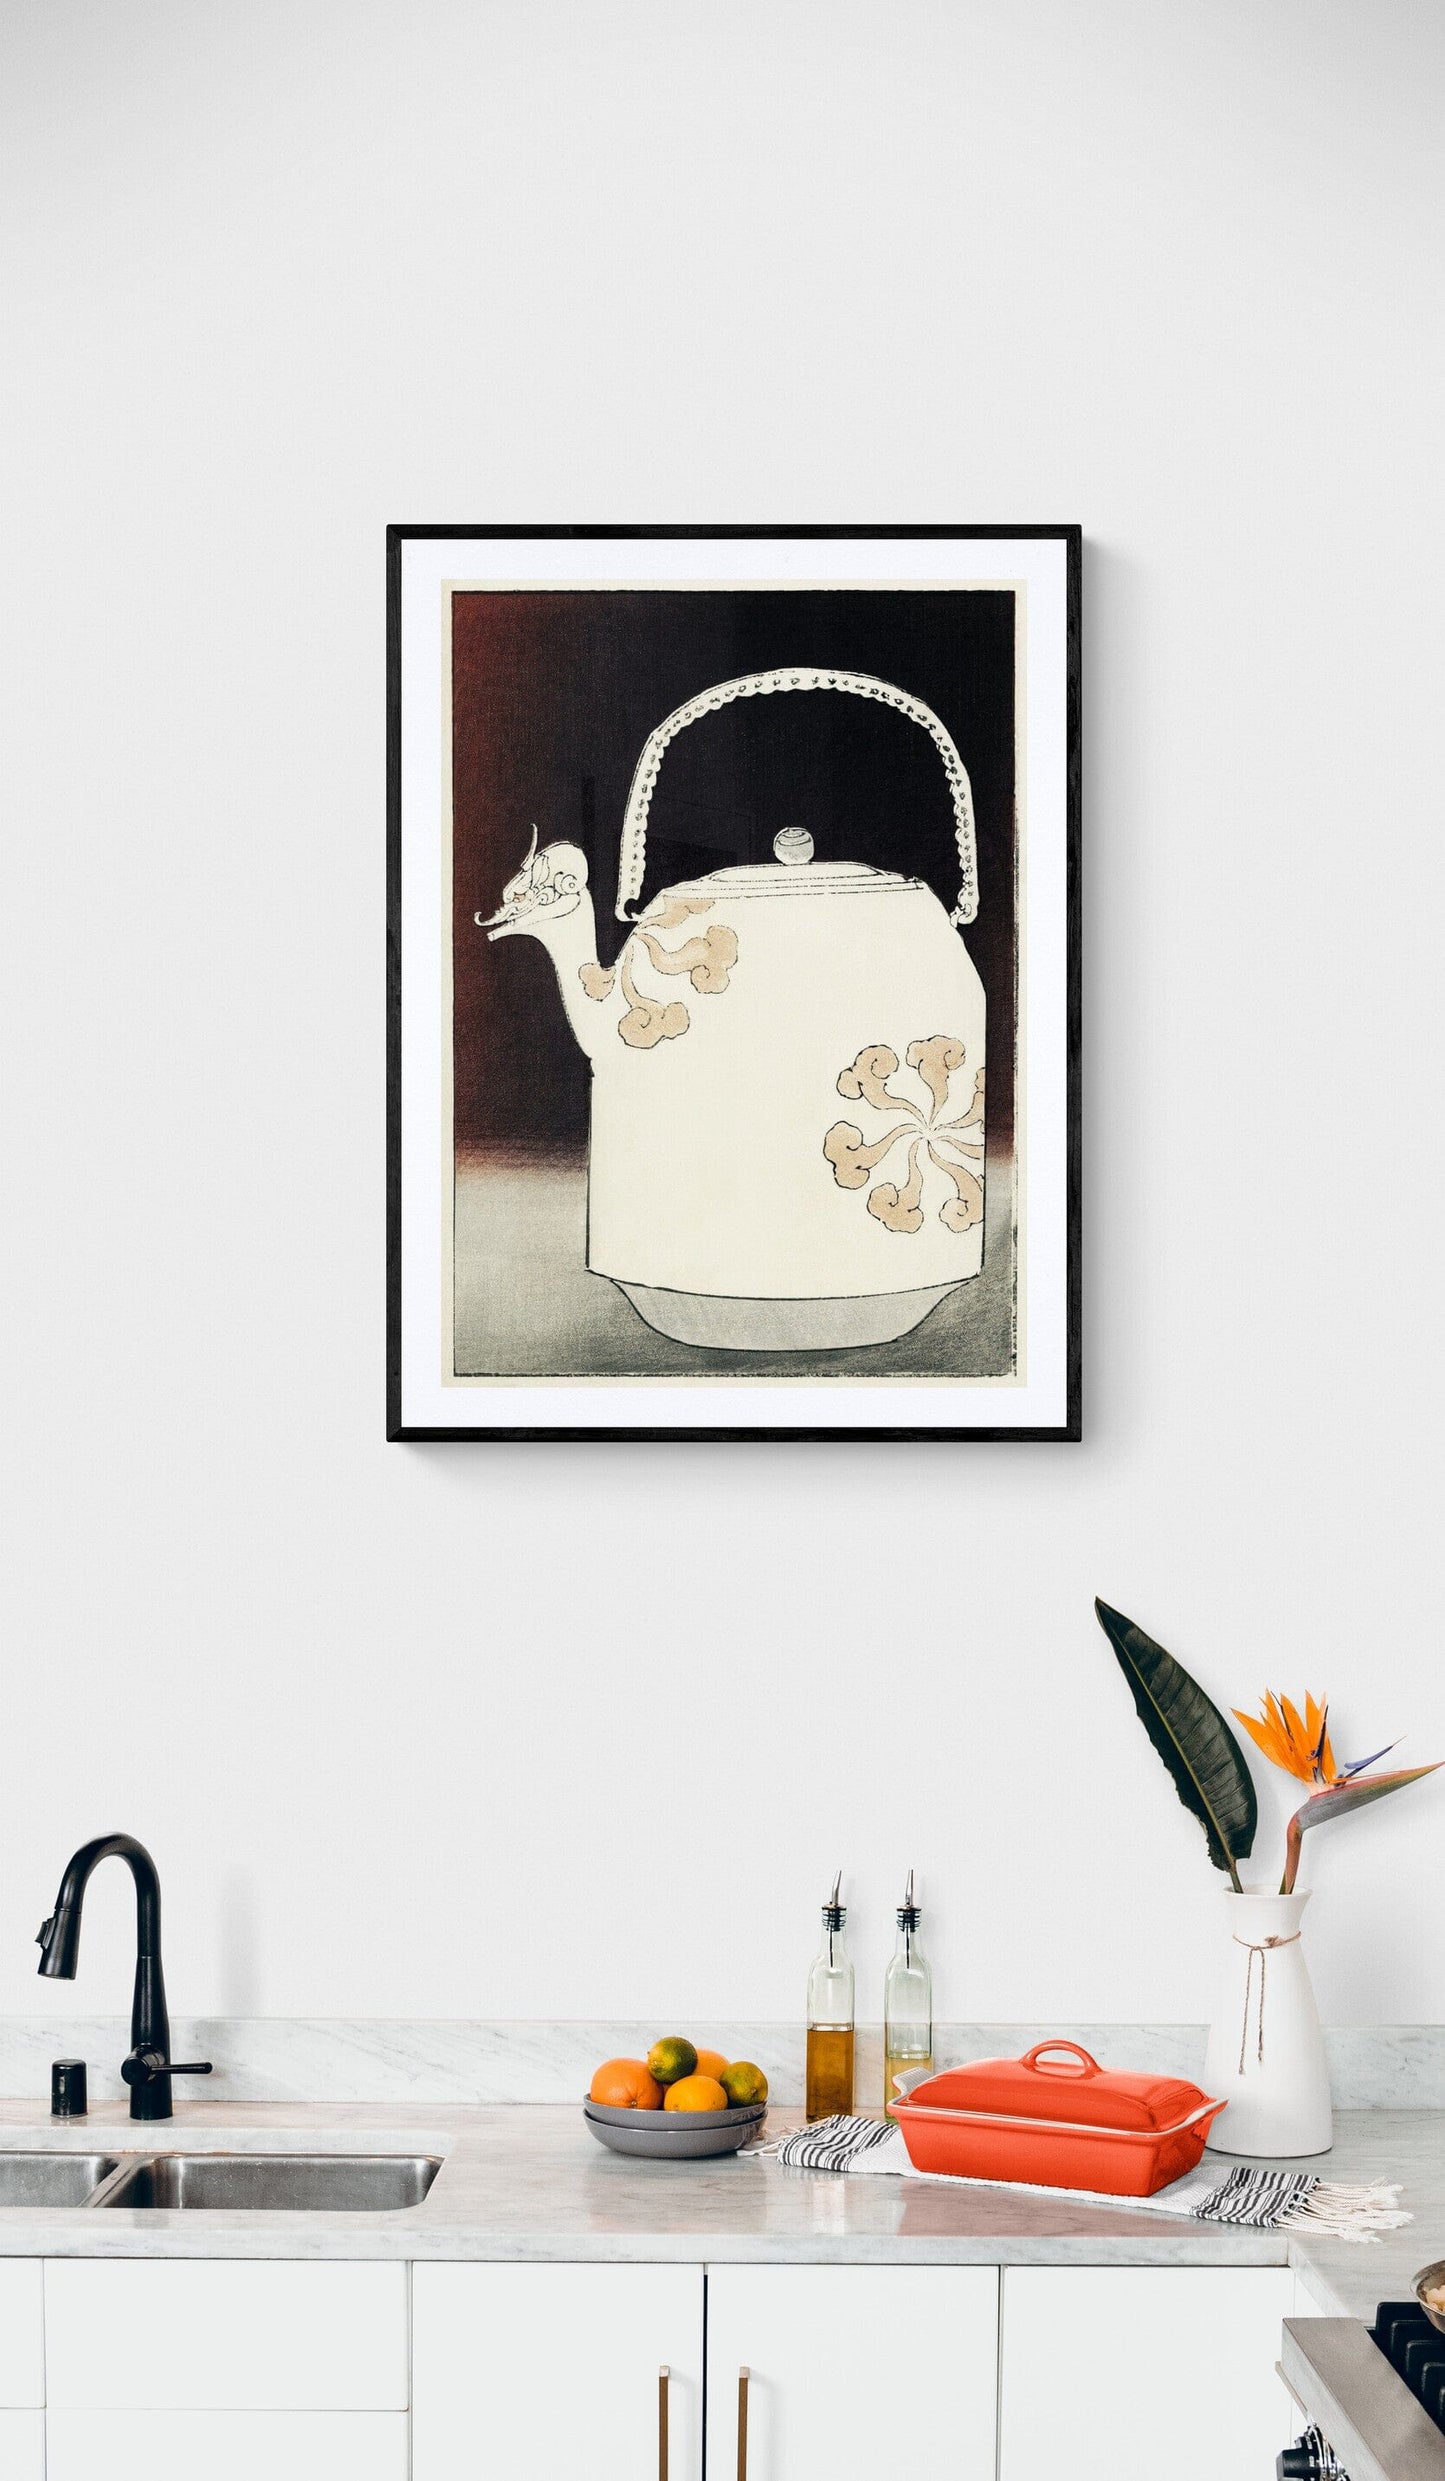 East Asian inspired kettle (1890s) | Japanese kitchen art print  The Trumpet Shop   